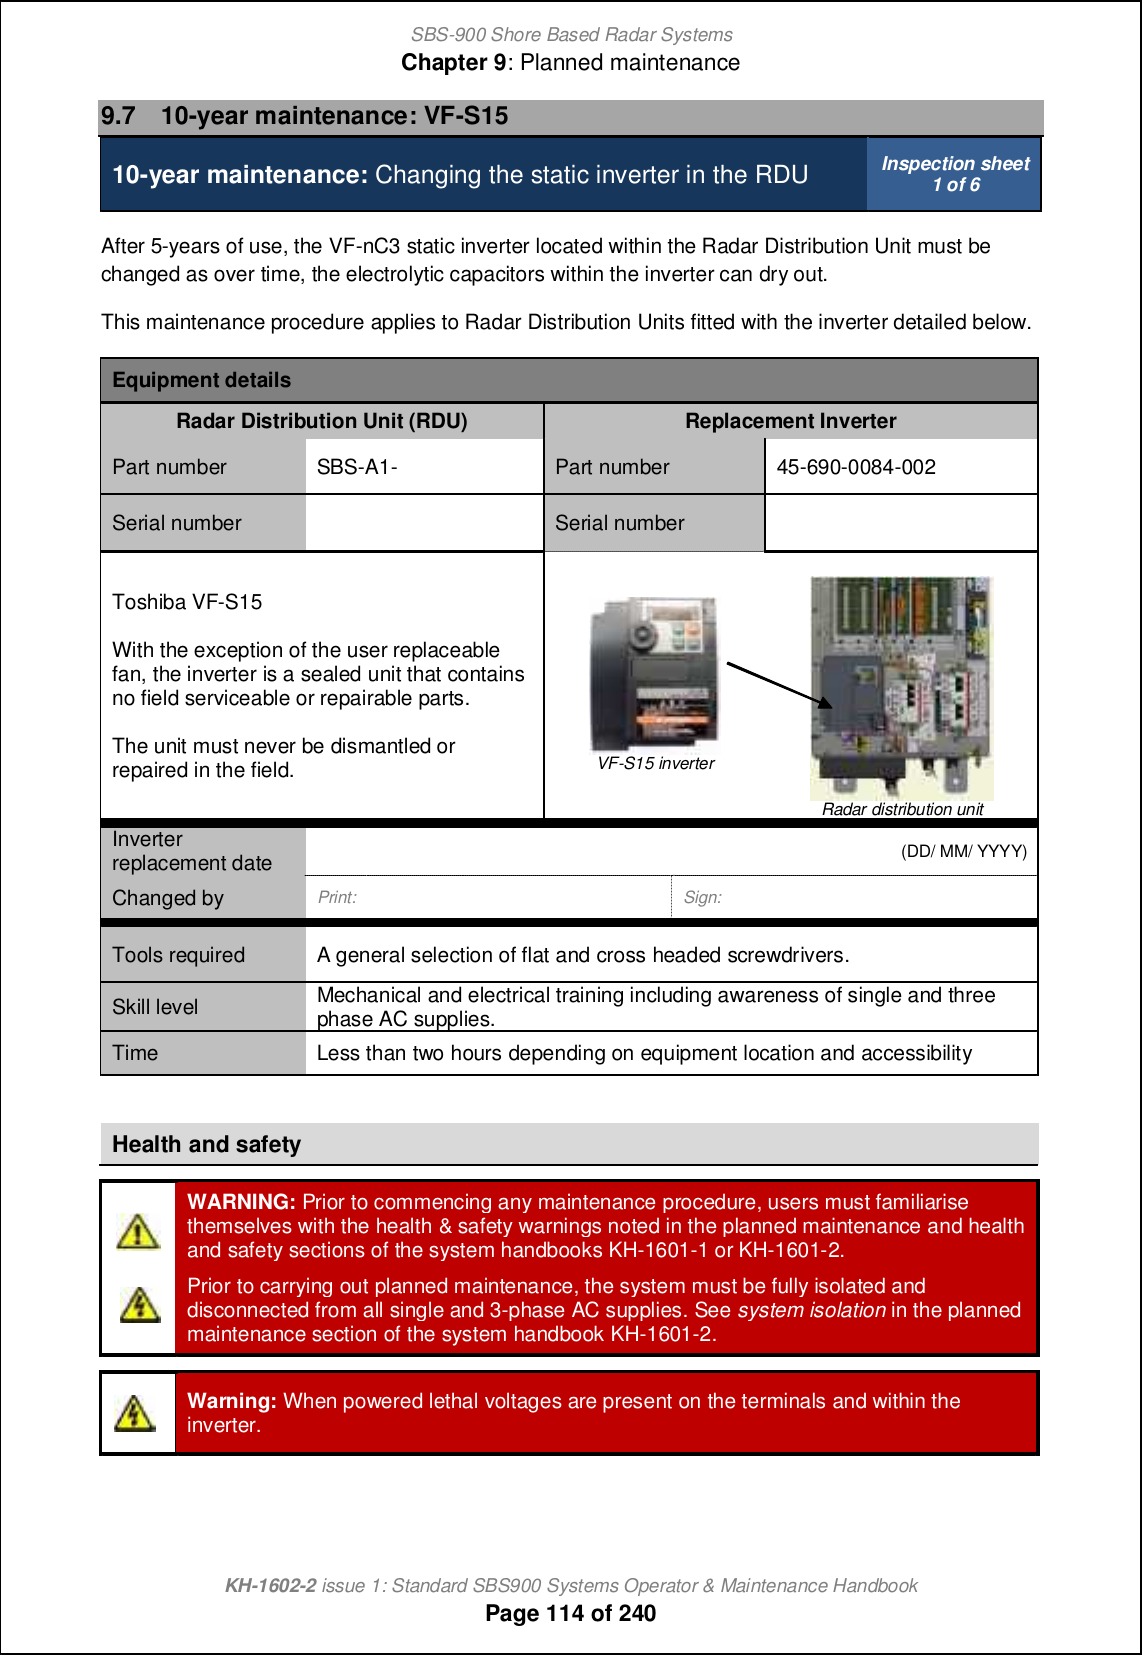 SBS-900 Shore Based Radar SystemsChapter 9: Planned maintenanceKH-1602-2 issue 1: Standard SBS900 Systems Operator &amp; Maintenance HandbookPage 114 of 2409.7 10-year maintenance: VF-S1510-year maintenance: Changing the static inverter in the RDU Inspection sheet1 of 6After 5-years of use, the VF-nC3 static inverter located within the Radar Distribution Unit must bechanged as over time, the electrolytic capacitors within the inverter can dry out.This maintenance procedure applies to Radar Distribution Units fitted with the inverter detailed below.Equipment detailsRadar Distribution Unit (RDU) Replacement InverterPart number SBS-A1- Part number 45-690-0084-002Serial number Serial numberToshiba VF-S15With the exception of the user replaceablefan, the inverter is a sealed unit that containsno field serviceable or repairable parts.The unit must never be dismantled orrepaired in the field. VF-S15 inverterRadar distribution unitInverterreplacement date (DD/ MM/ YYYY)Changed by Print: Sign:Tools required A general selection of flat and cross headed screwdrivers.Skill level Mechanical and electrical training including awareness of single and threephase AC supplies.Time Less than two hours depending on equipment location and accessibilityHealth and safetyWARNING: Prior to commencing any maintenance procedure, users must familiarisethemselves with the health &amp; safety warnings noted in the planned maintenance and healthand safety sections of the system handbooks KH-1601-1 or KH-1601-2.Prior to carrying out planned maintenance, the system must be fully isolated anddisconnected from all single and 3-phase AC supplies. See system isolation in the plannedmaintenance section of the system handbook KH-1601-2.Warning: When powered lethal voltages are present on the terminals and within theinverter.